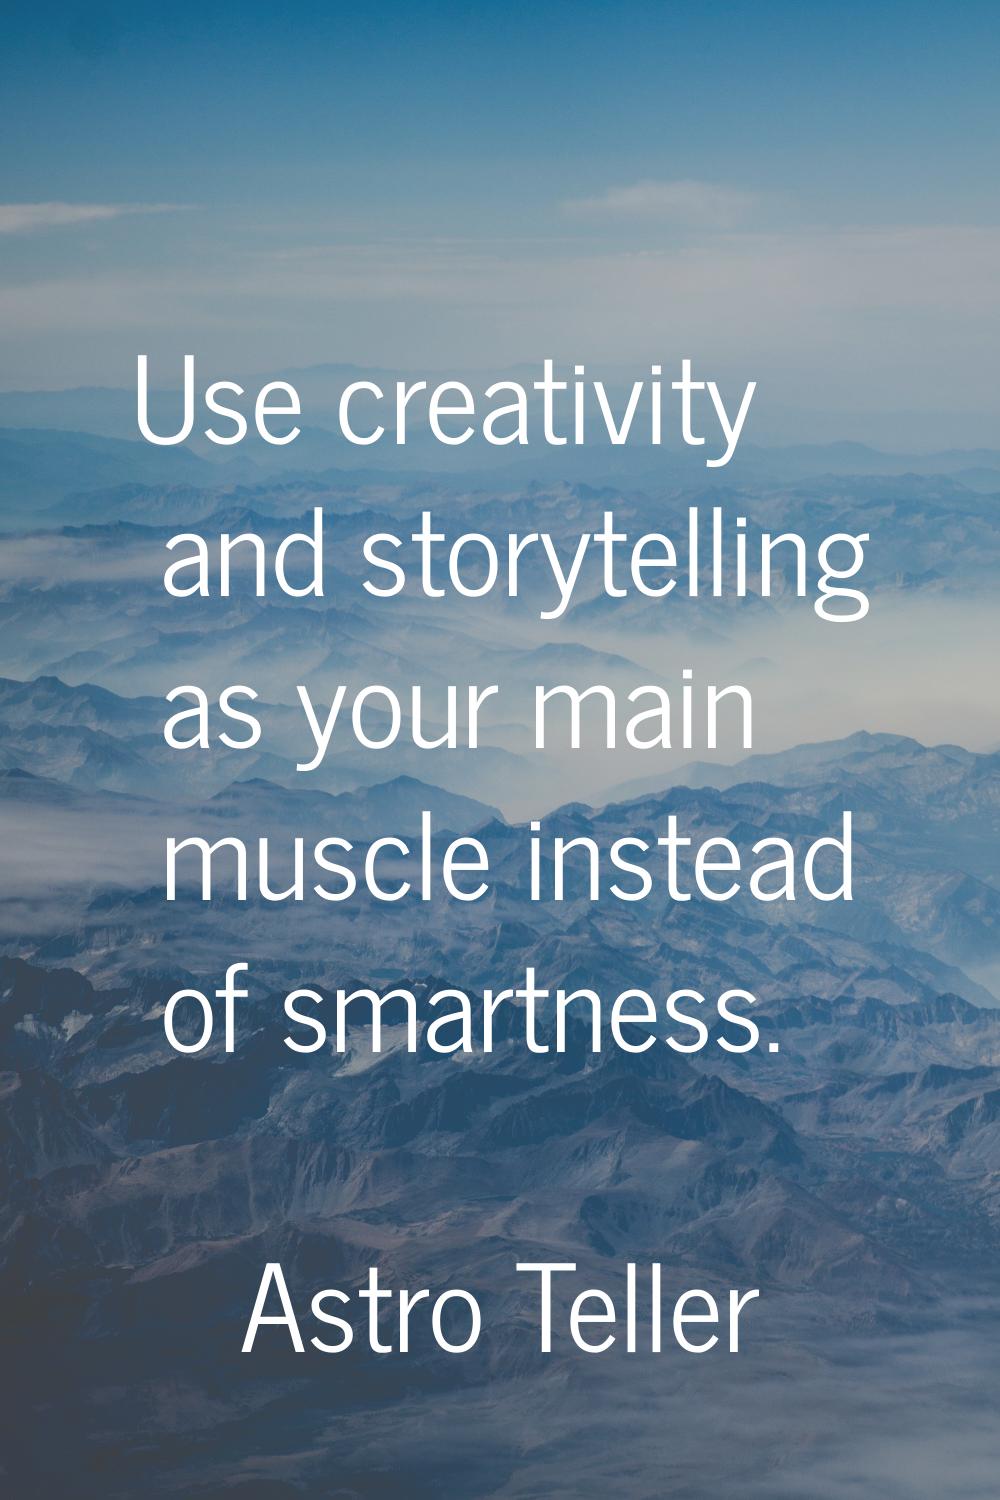 Use creativity and storytelling as your main muscle instead of smartness.